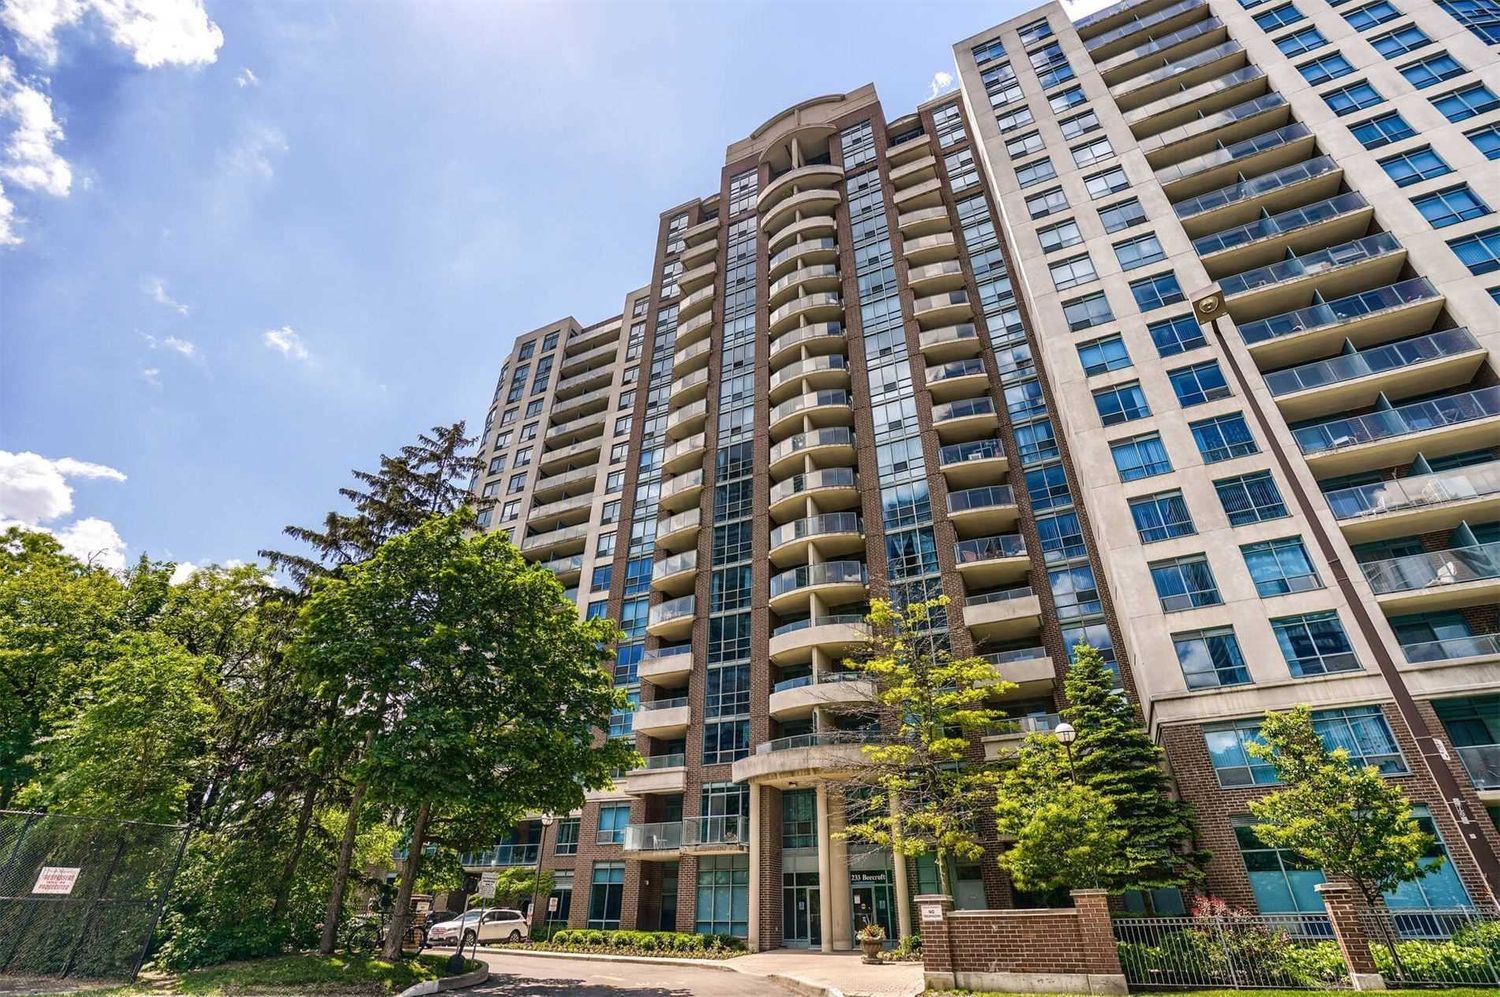 233 Beecroft Road. Peninsula Place Condos is located in  North York, Toronto - image #2 of 2